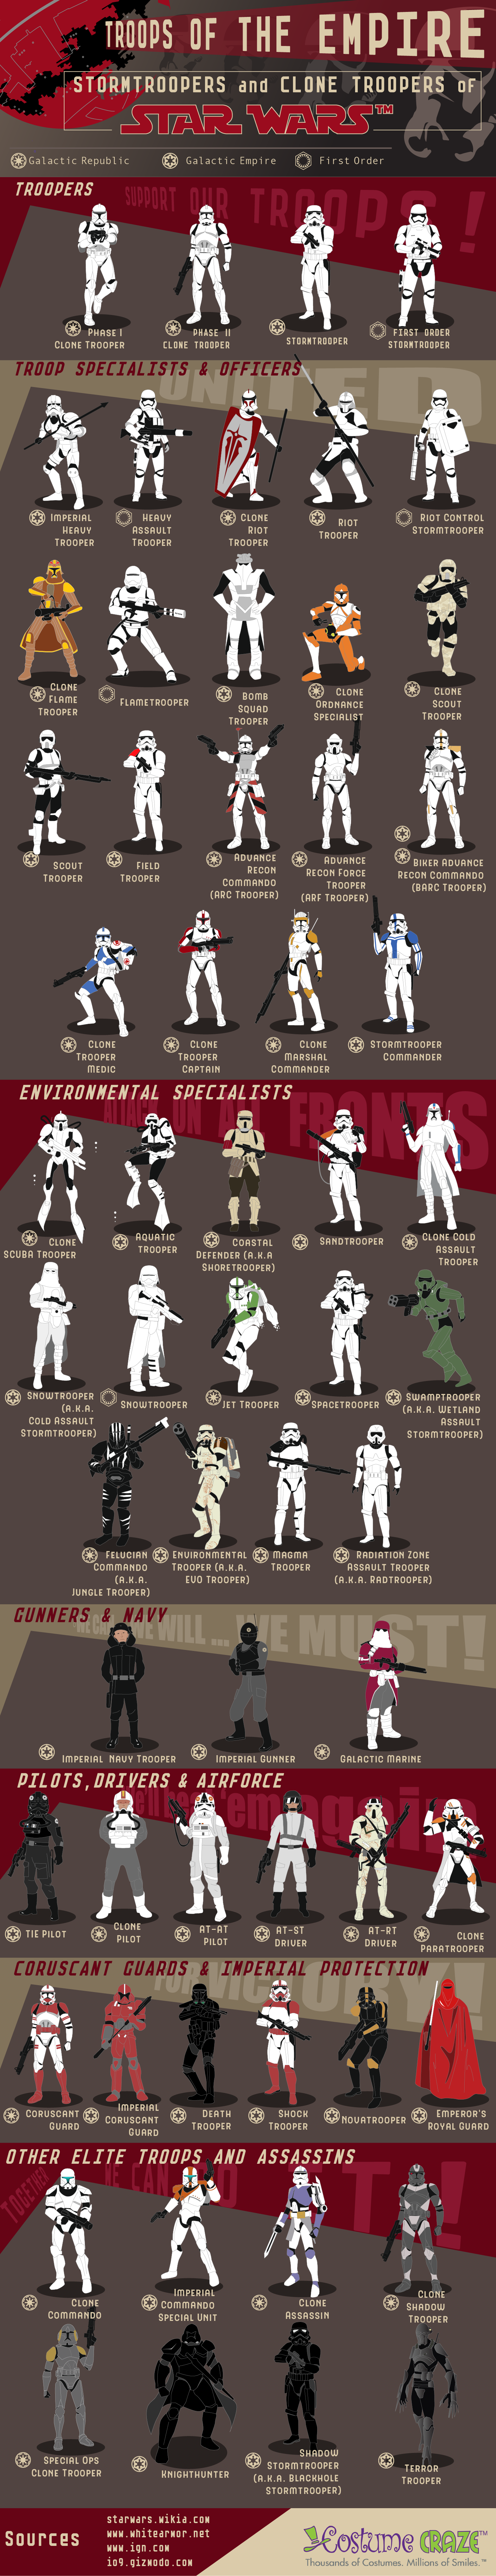 How to Join the Troops of the Empire: Just for the Day! - Infographic